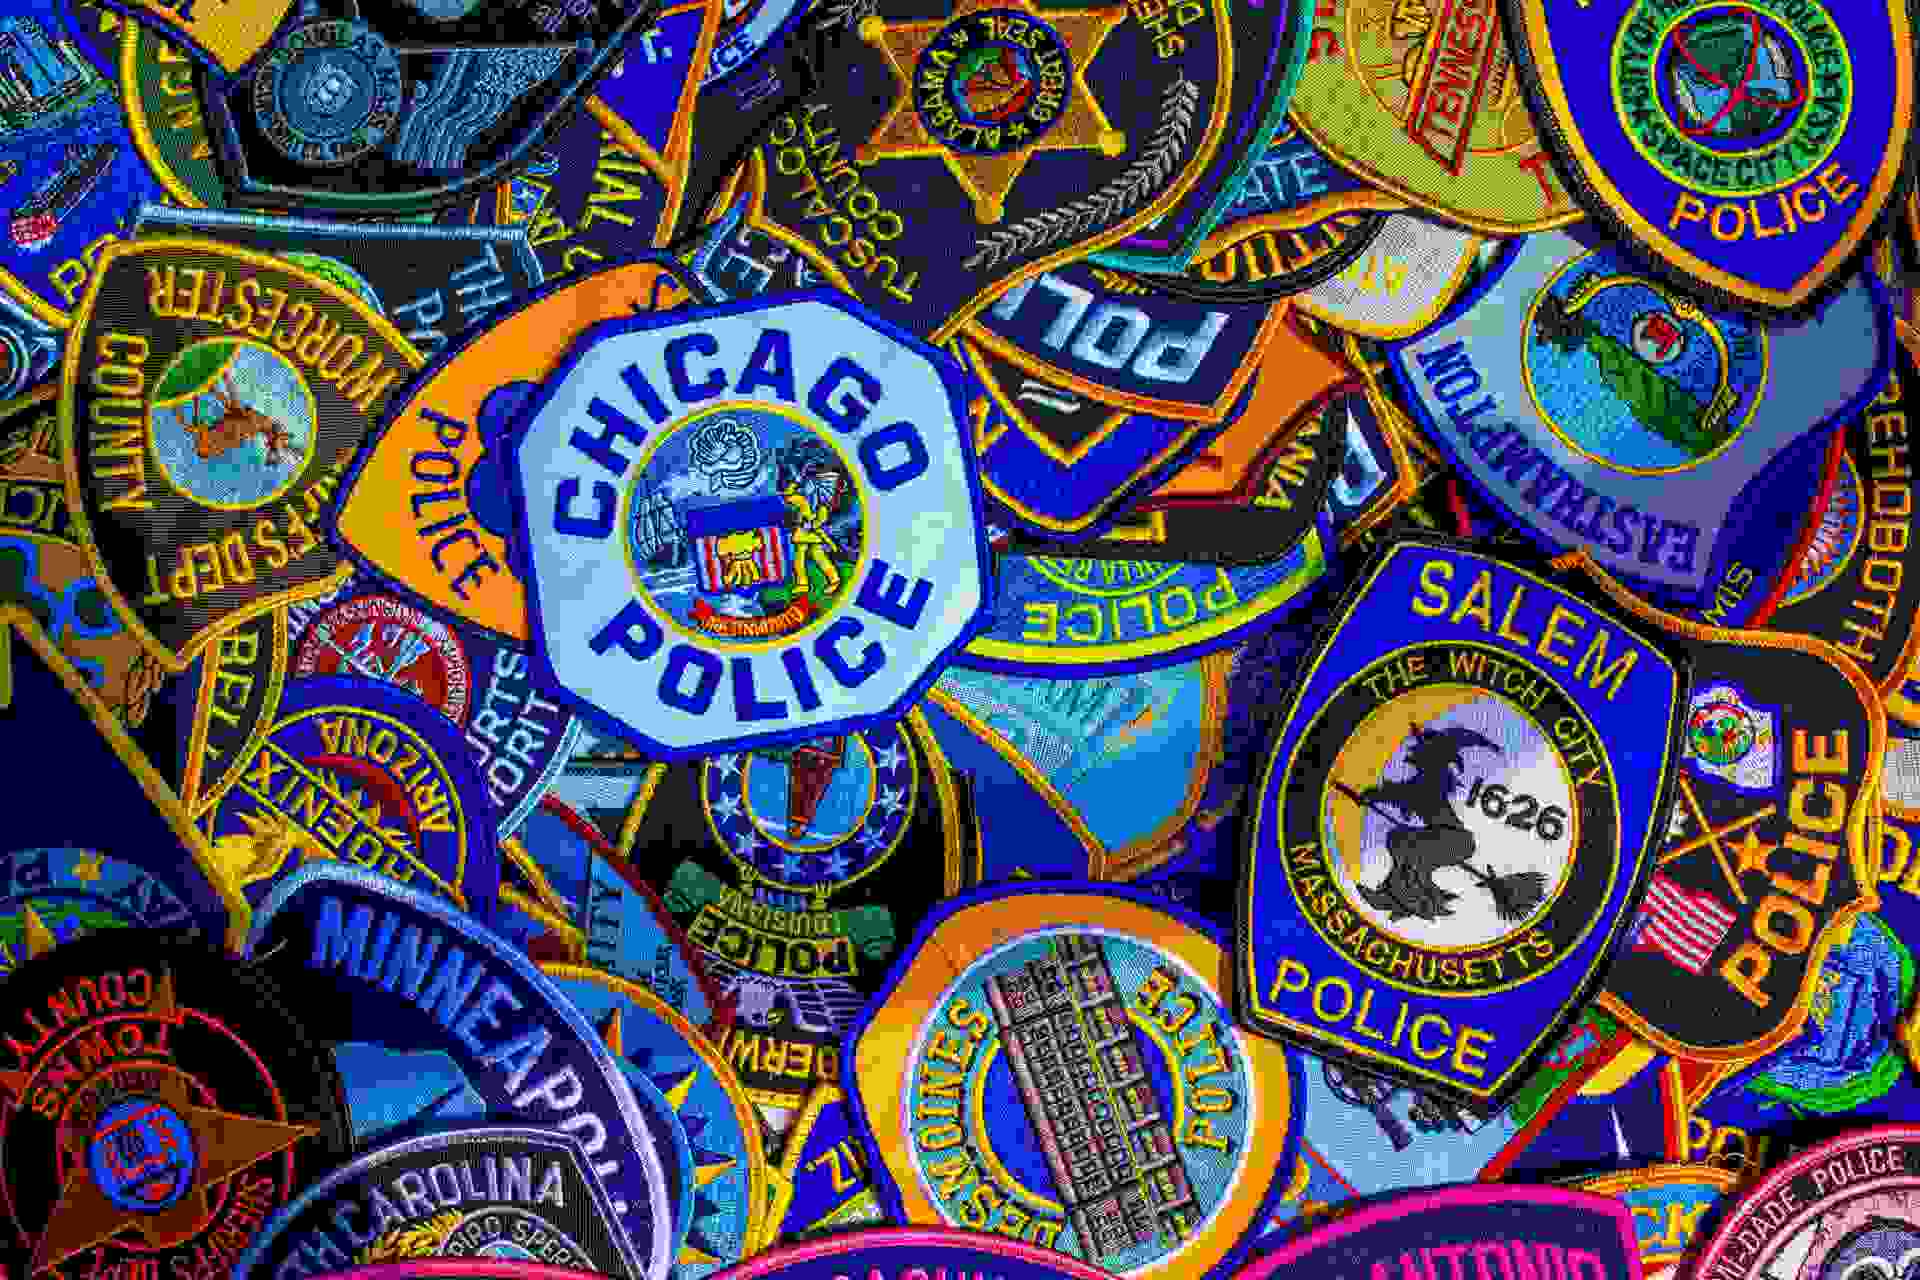 a variety of police badges from different US states